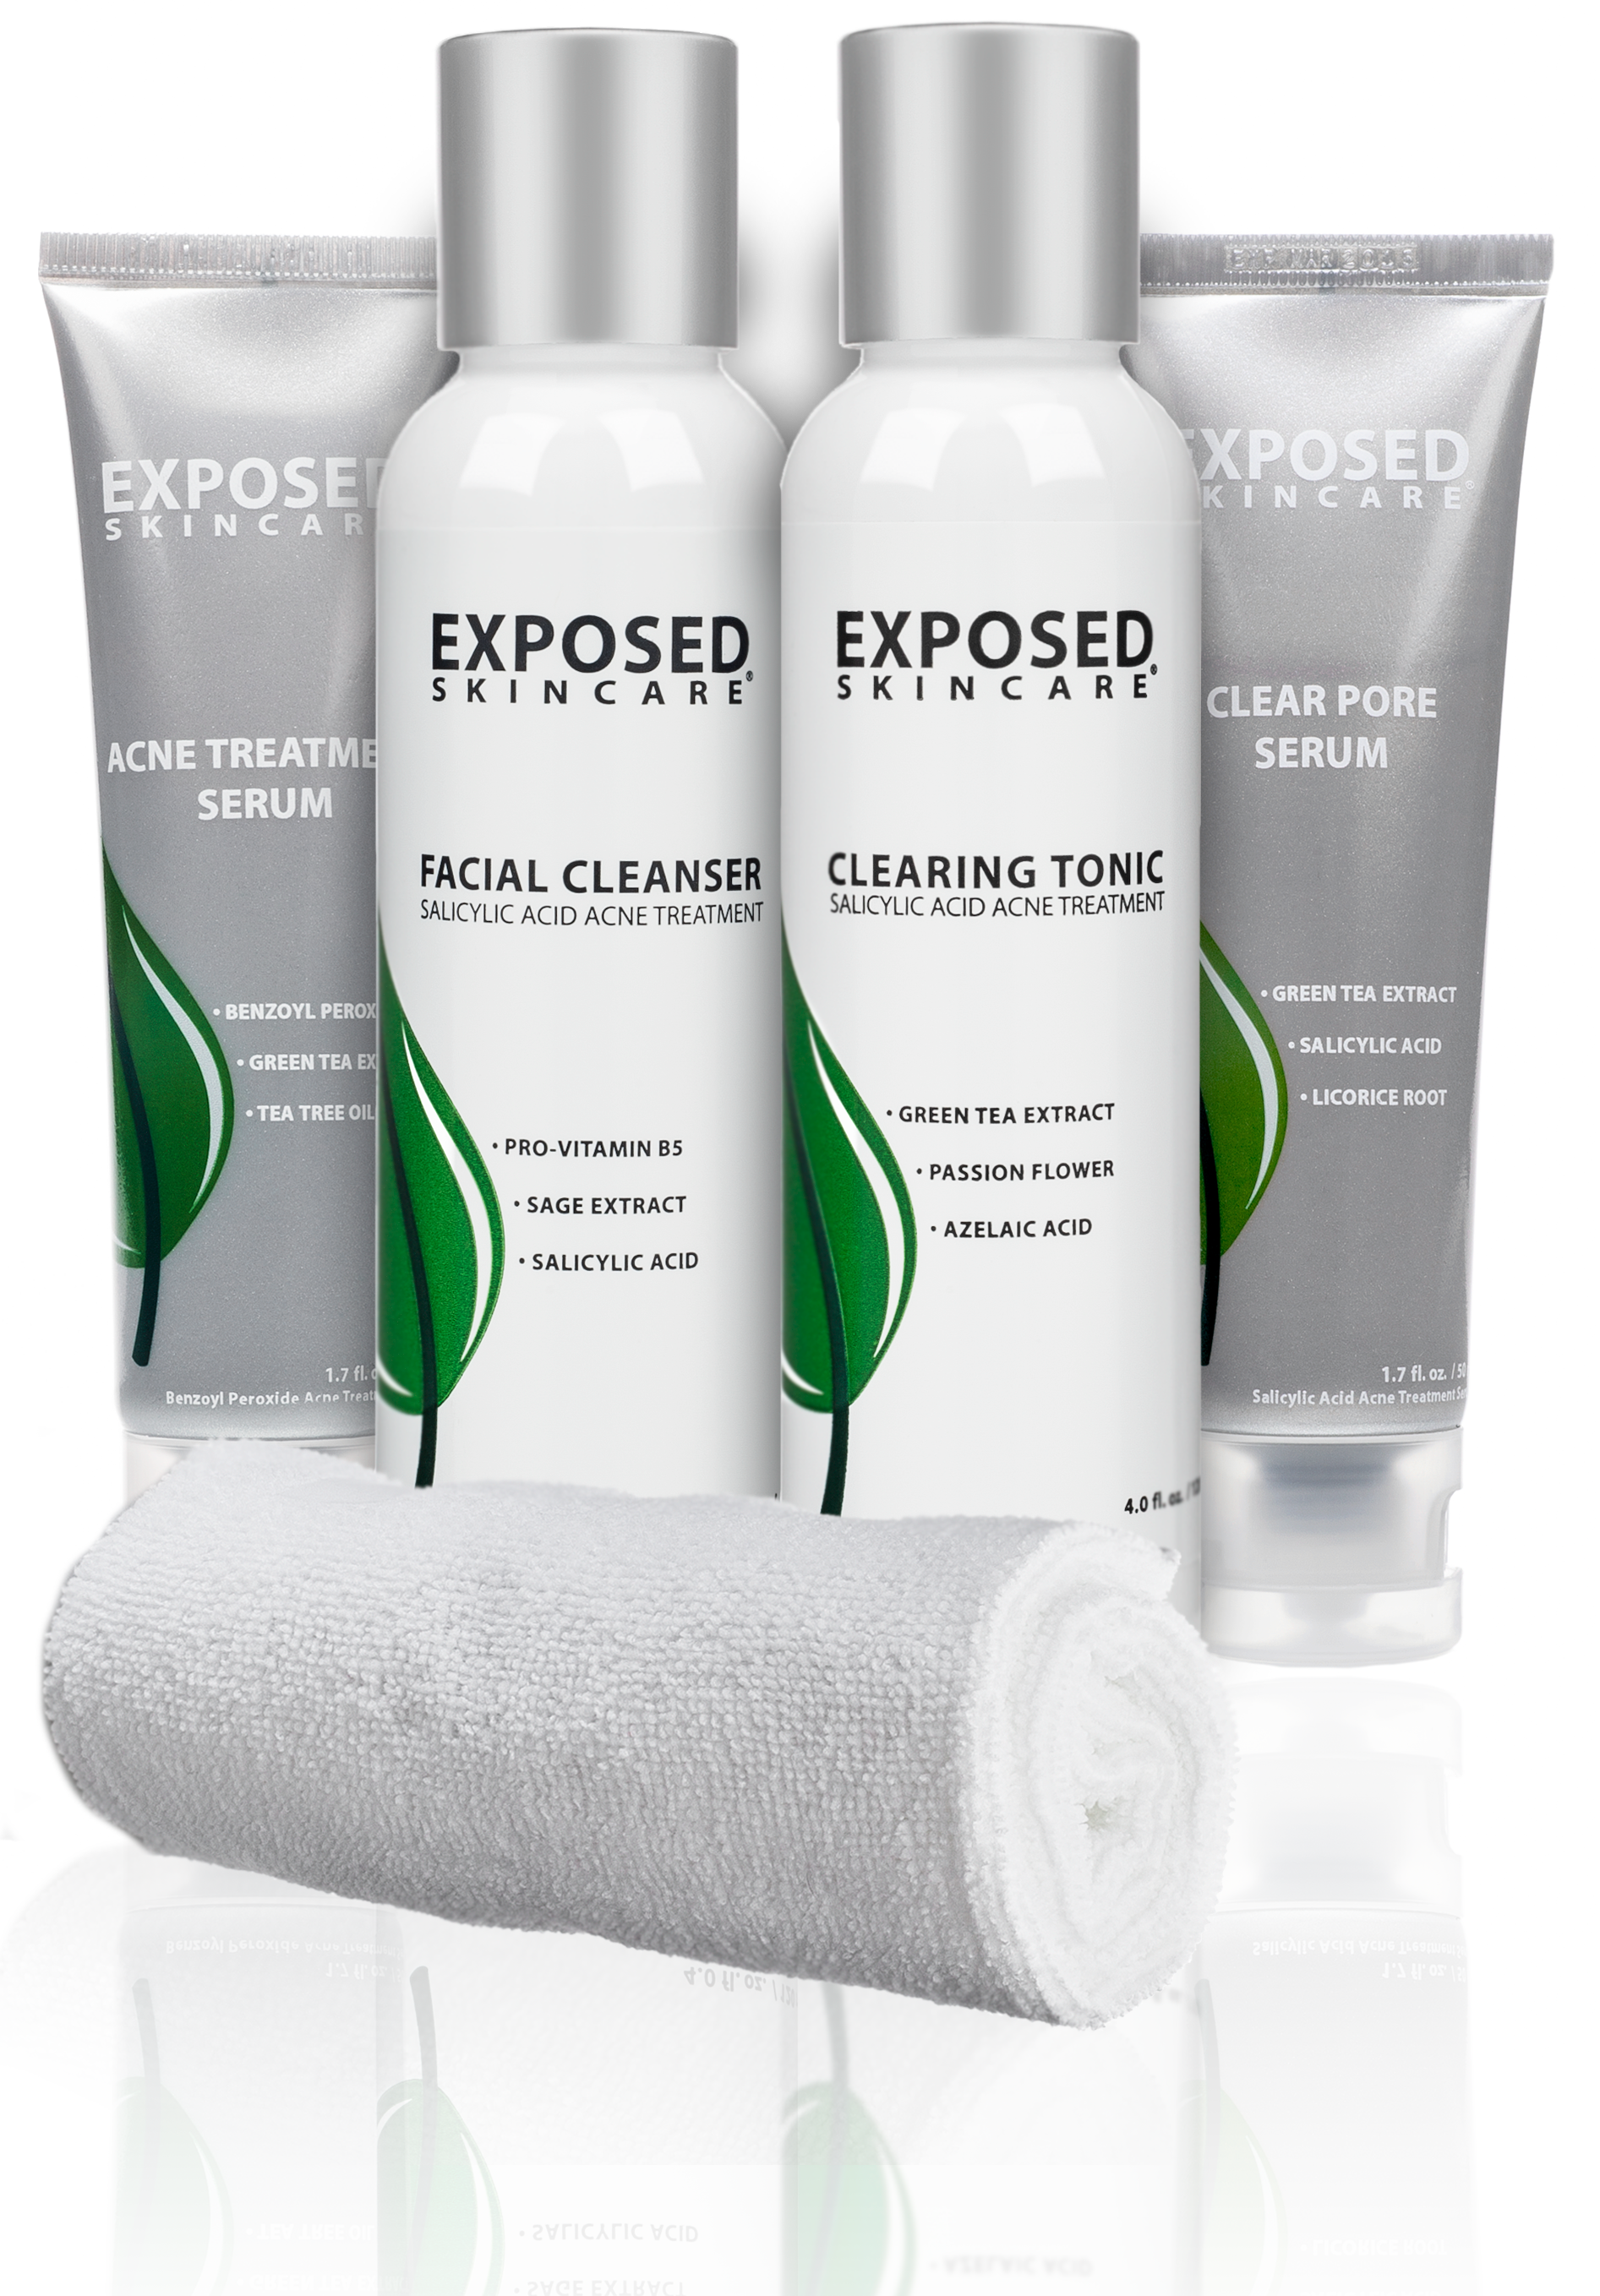 60 Days to Clearer with Exposed Skincare -